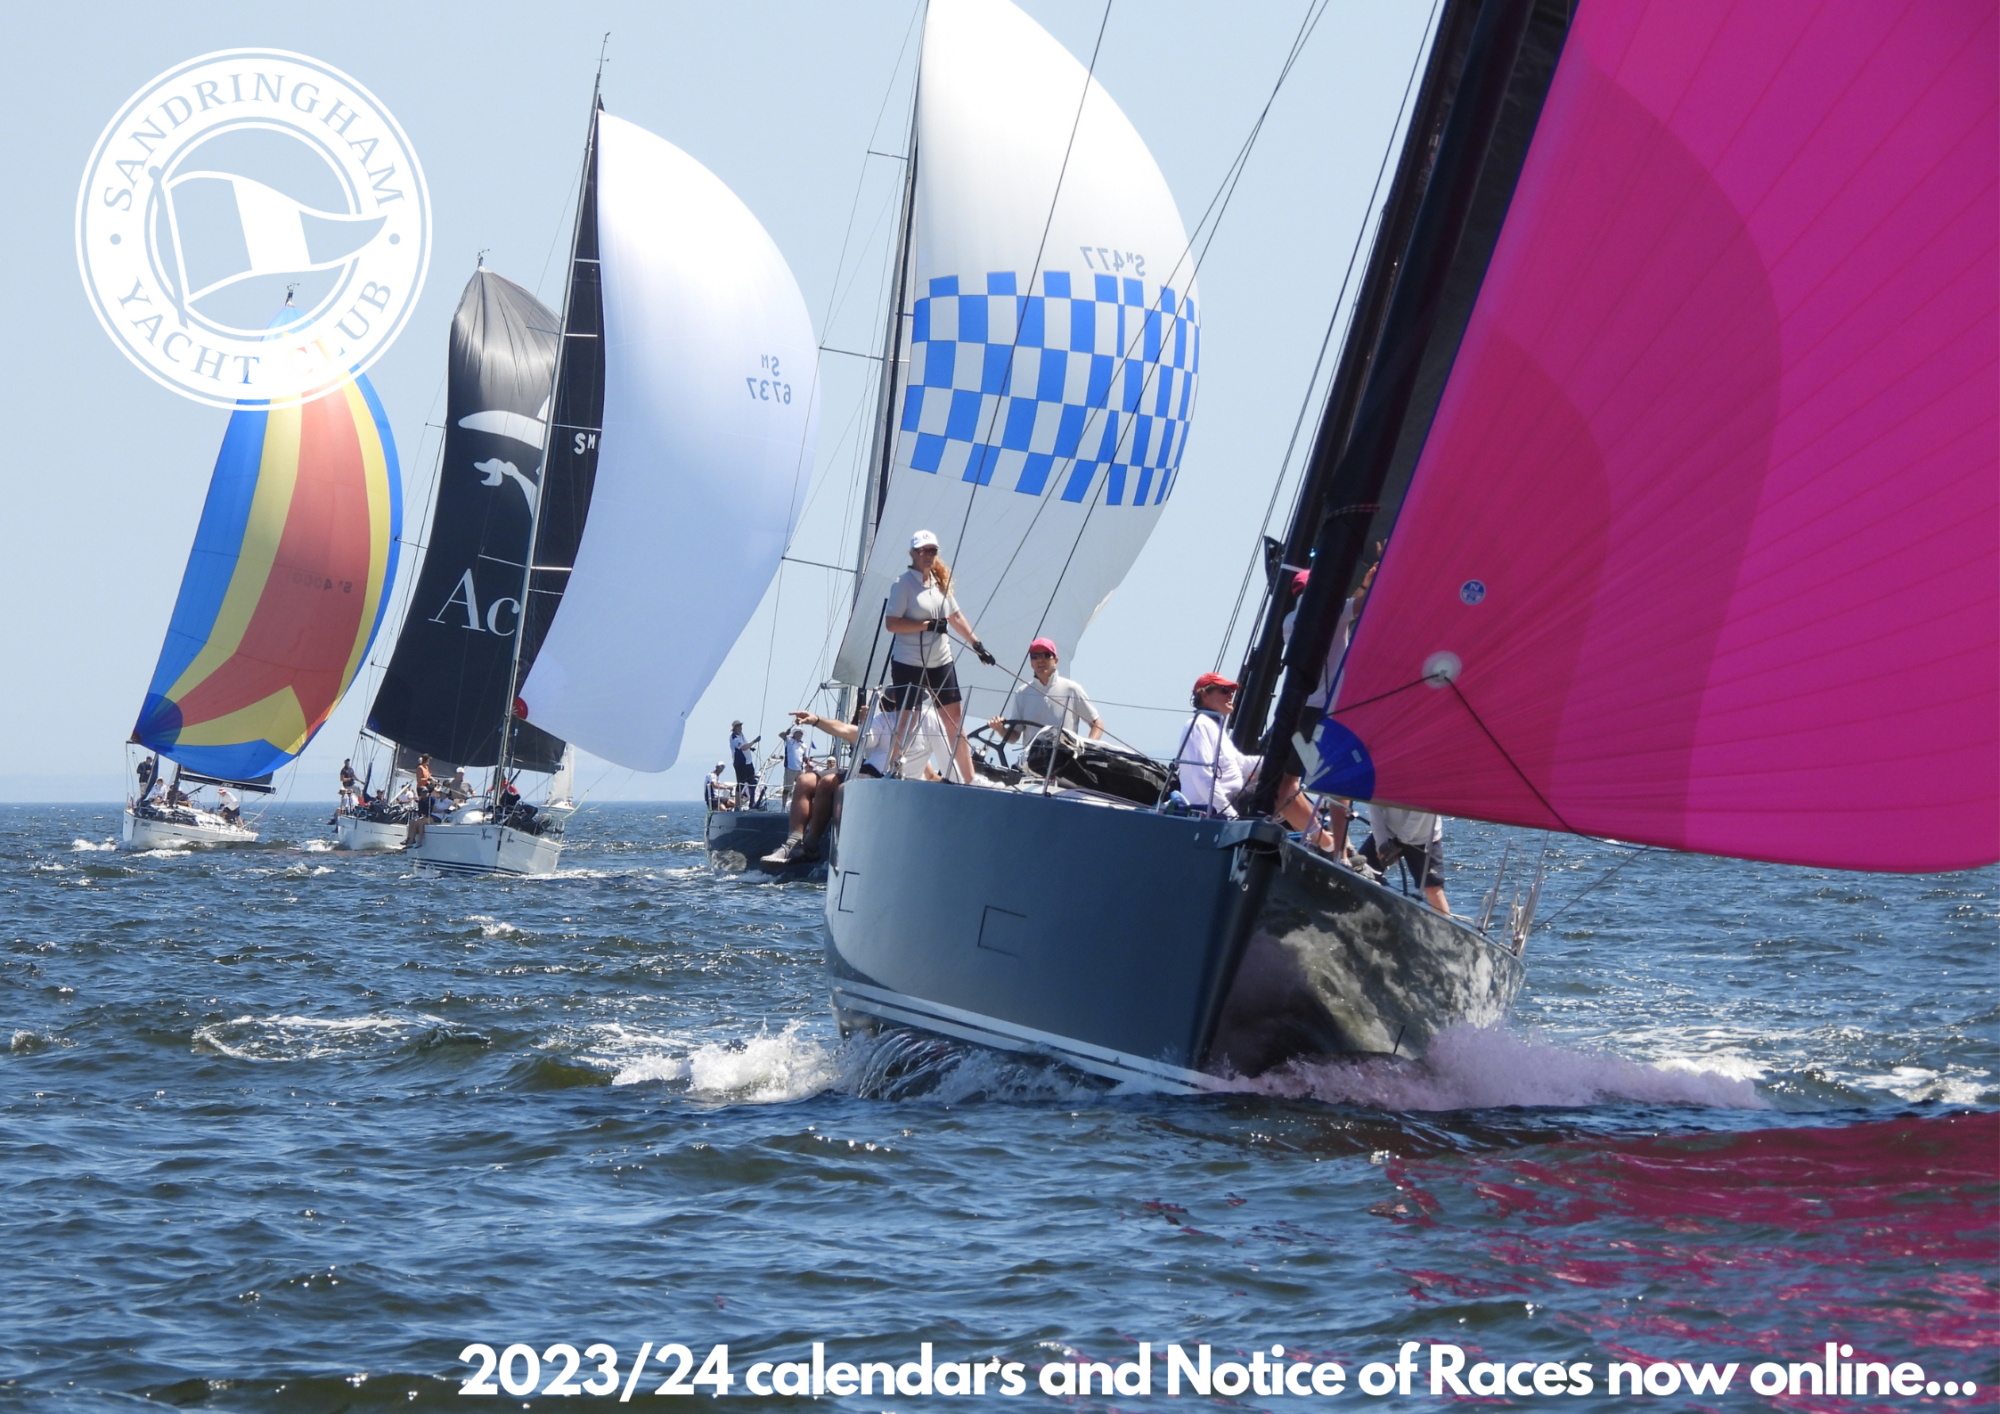 2023/24 Calendars and Notice of Races now online